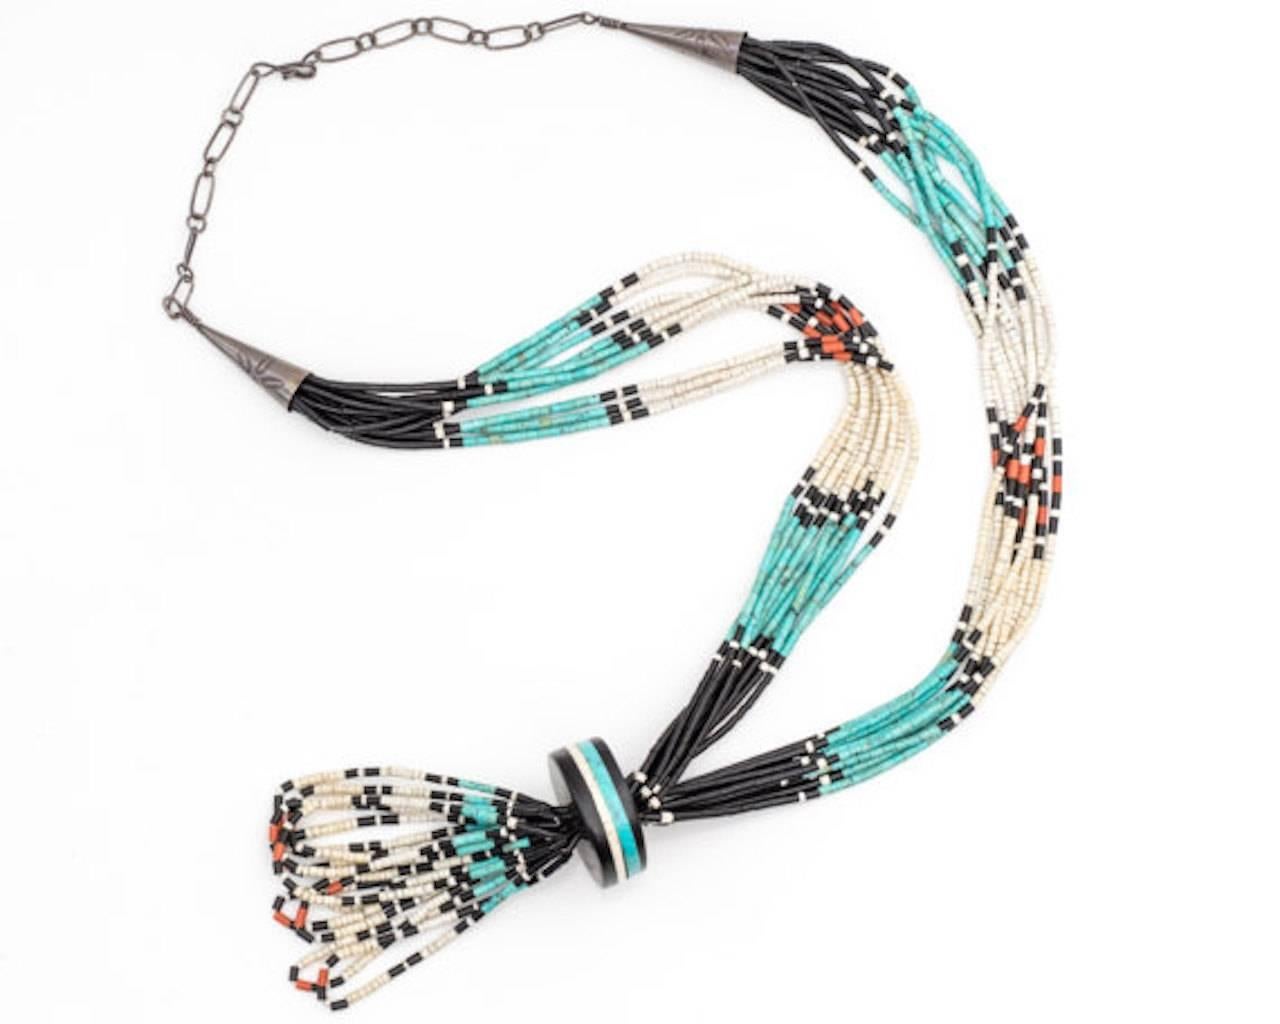 Sterling Silver, Turquoise, Onyx, Coral Necklace 

This 34 inch long necklace features natural stone beads including Turquoise, Onyx and Coral. Navajo Nation artists of Southwestern America arranged these natural stones into a beautiful design. The